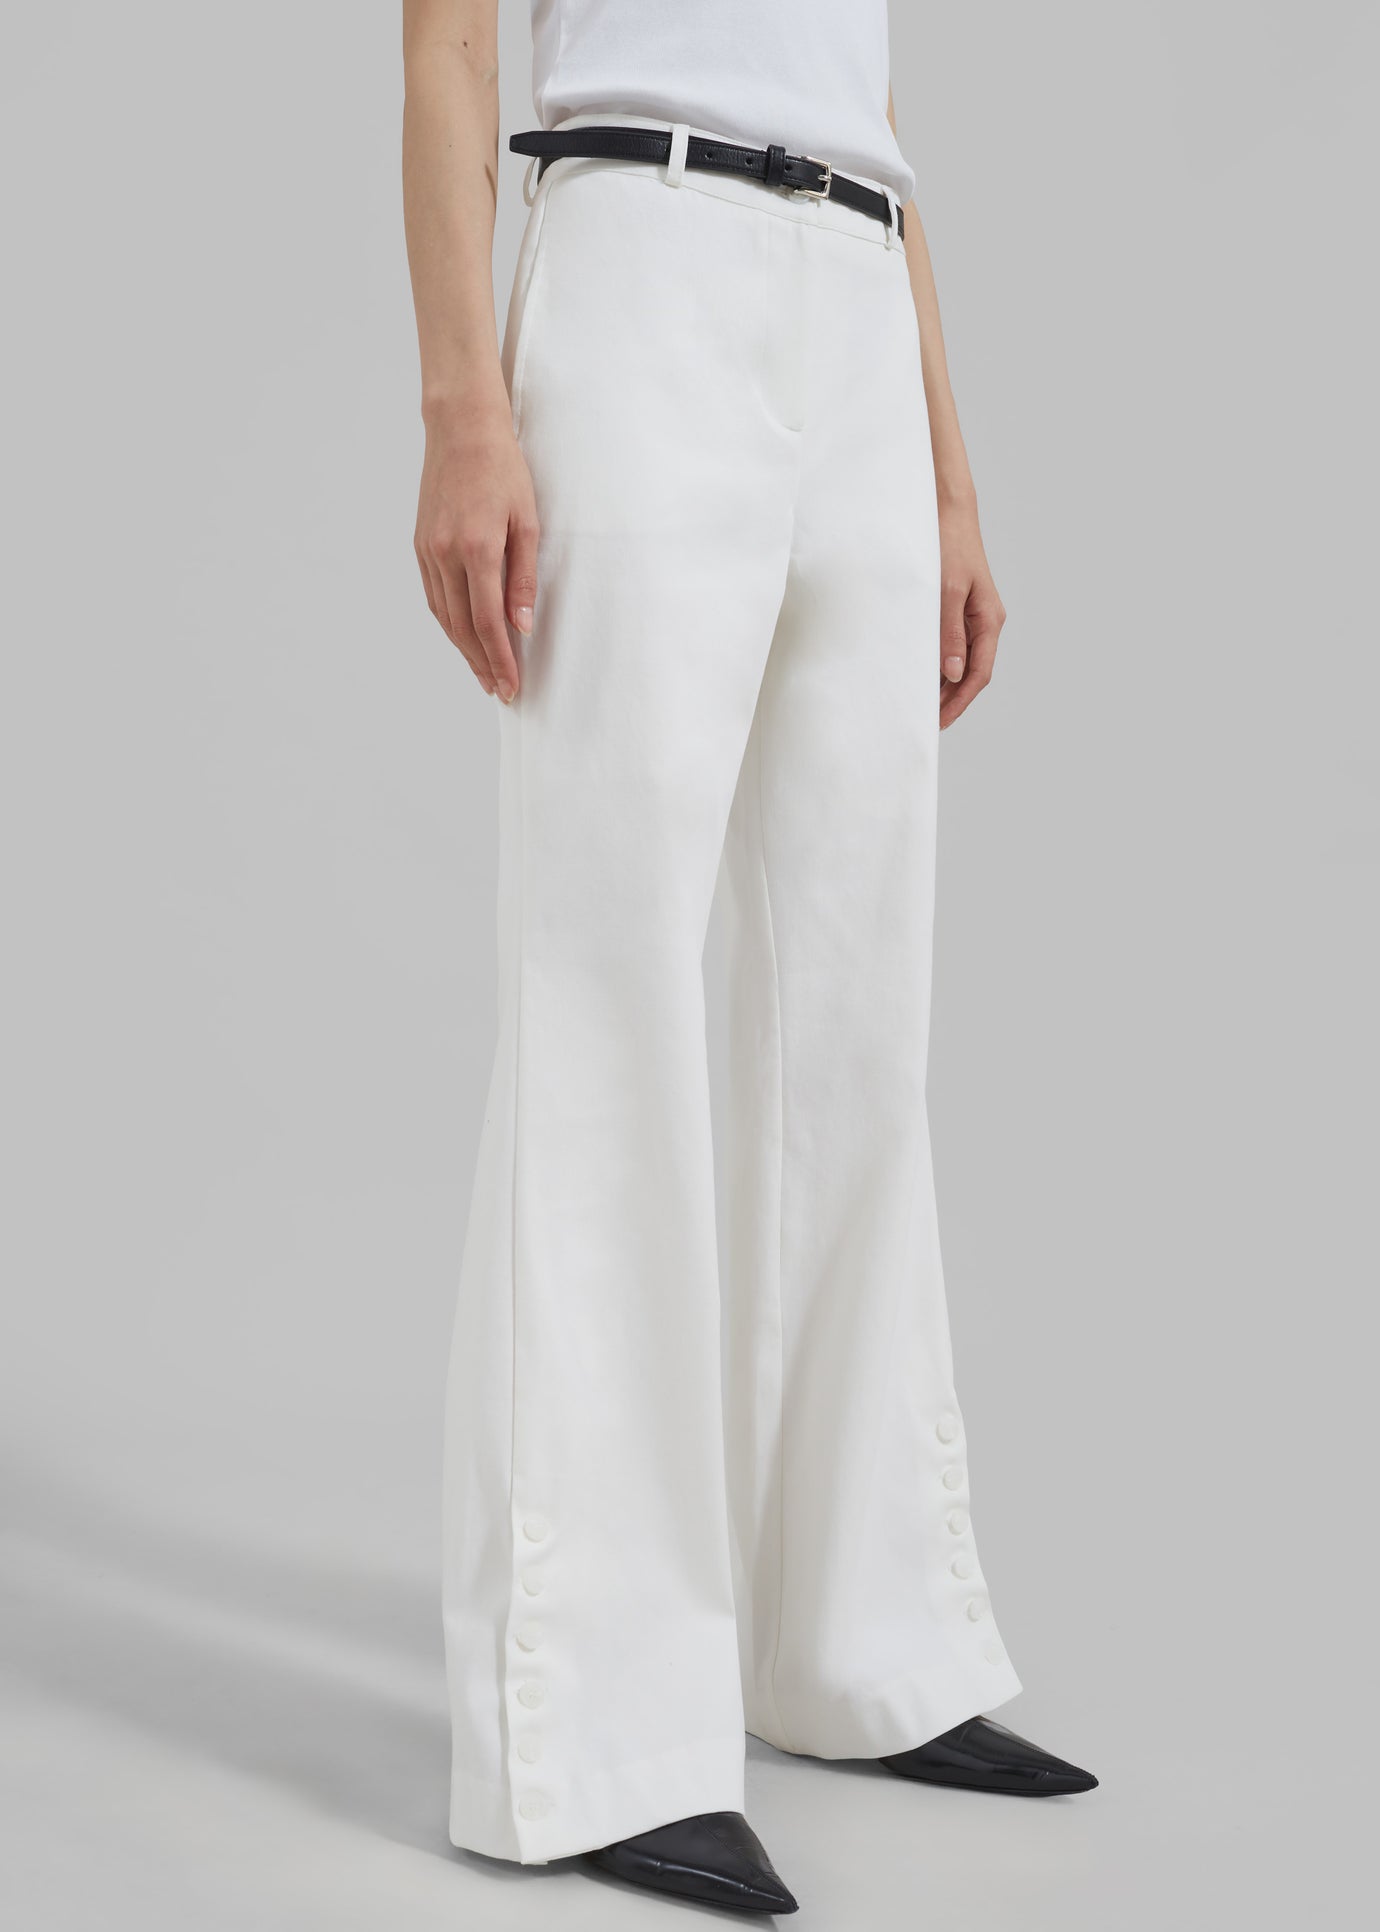 Michelle Flare Pants - Ivory - 1